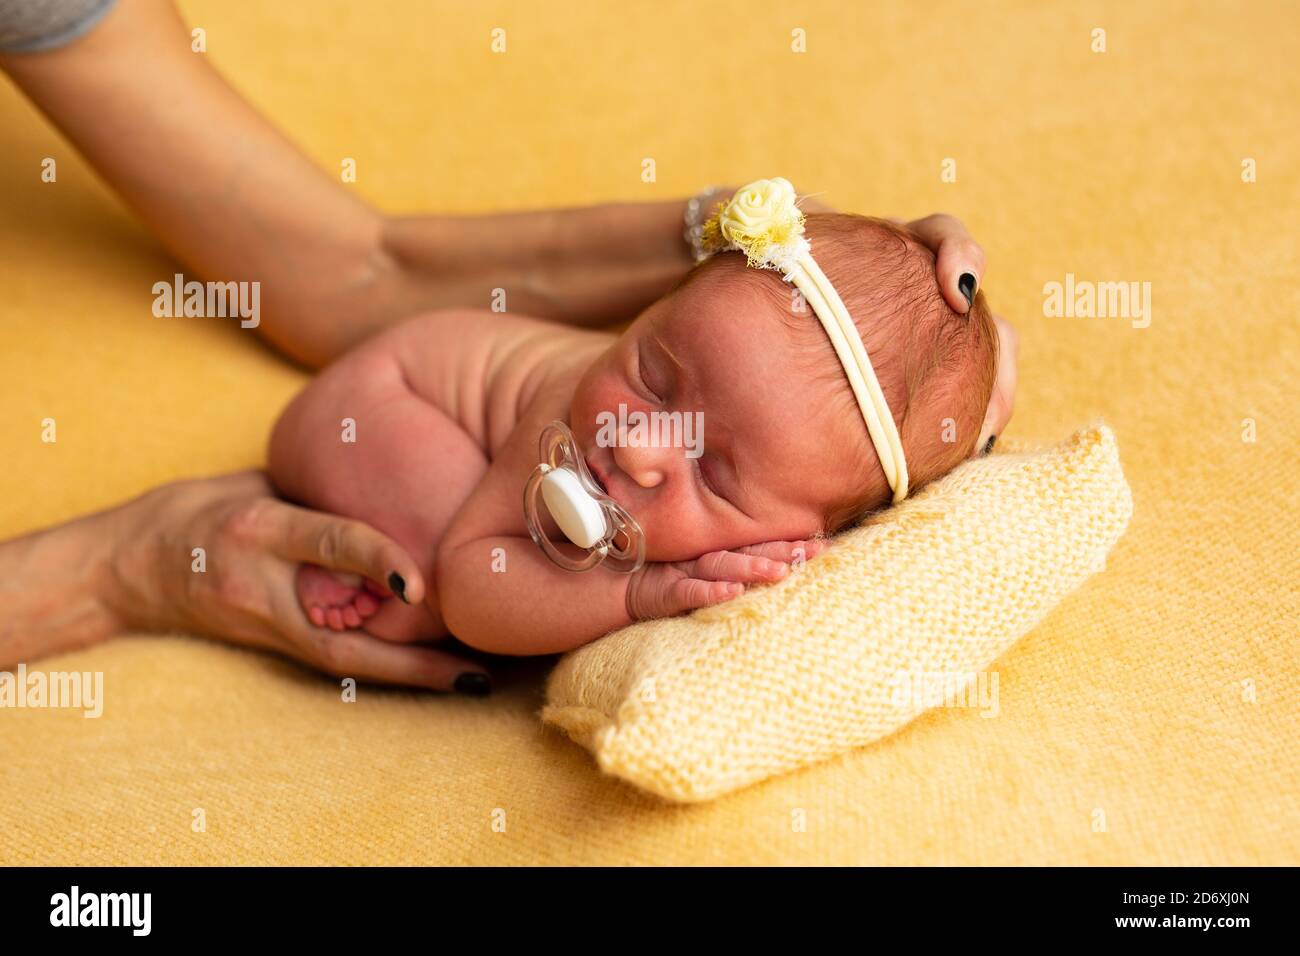 Newborn baby concept photography preparation, cute new born baby back with a bandage on the head, with photographer hands Stock Photo